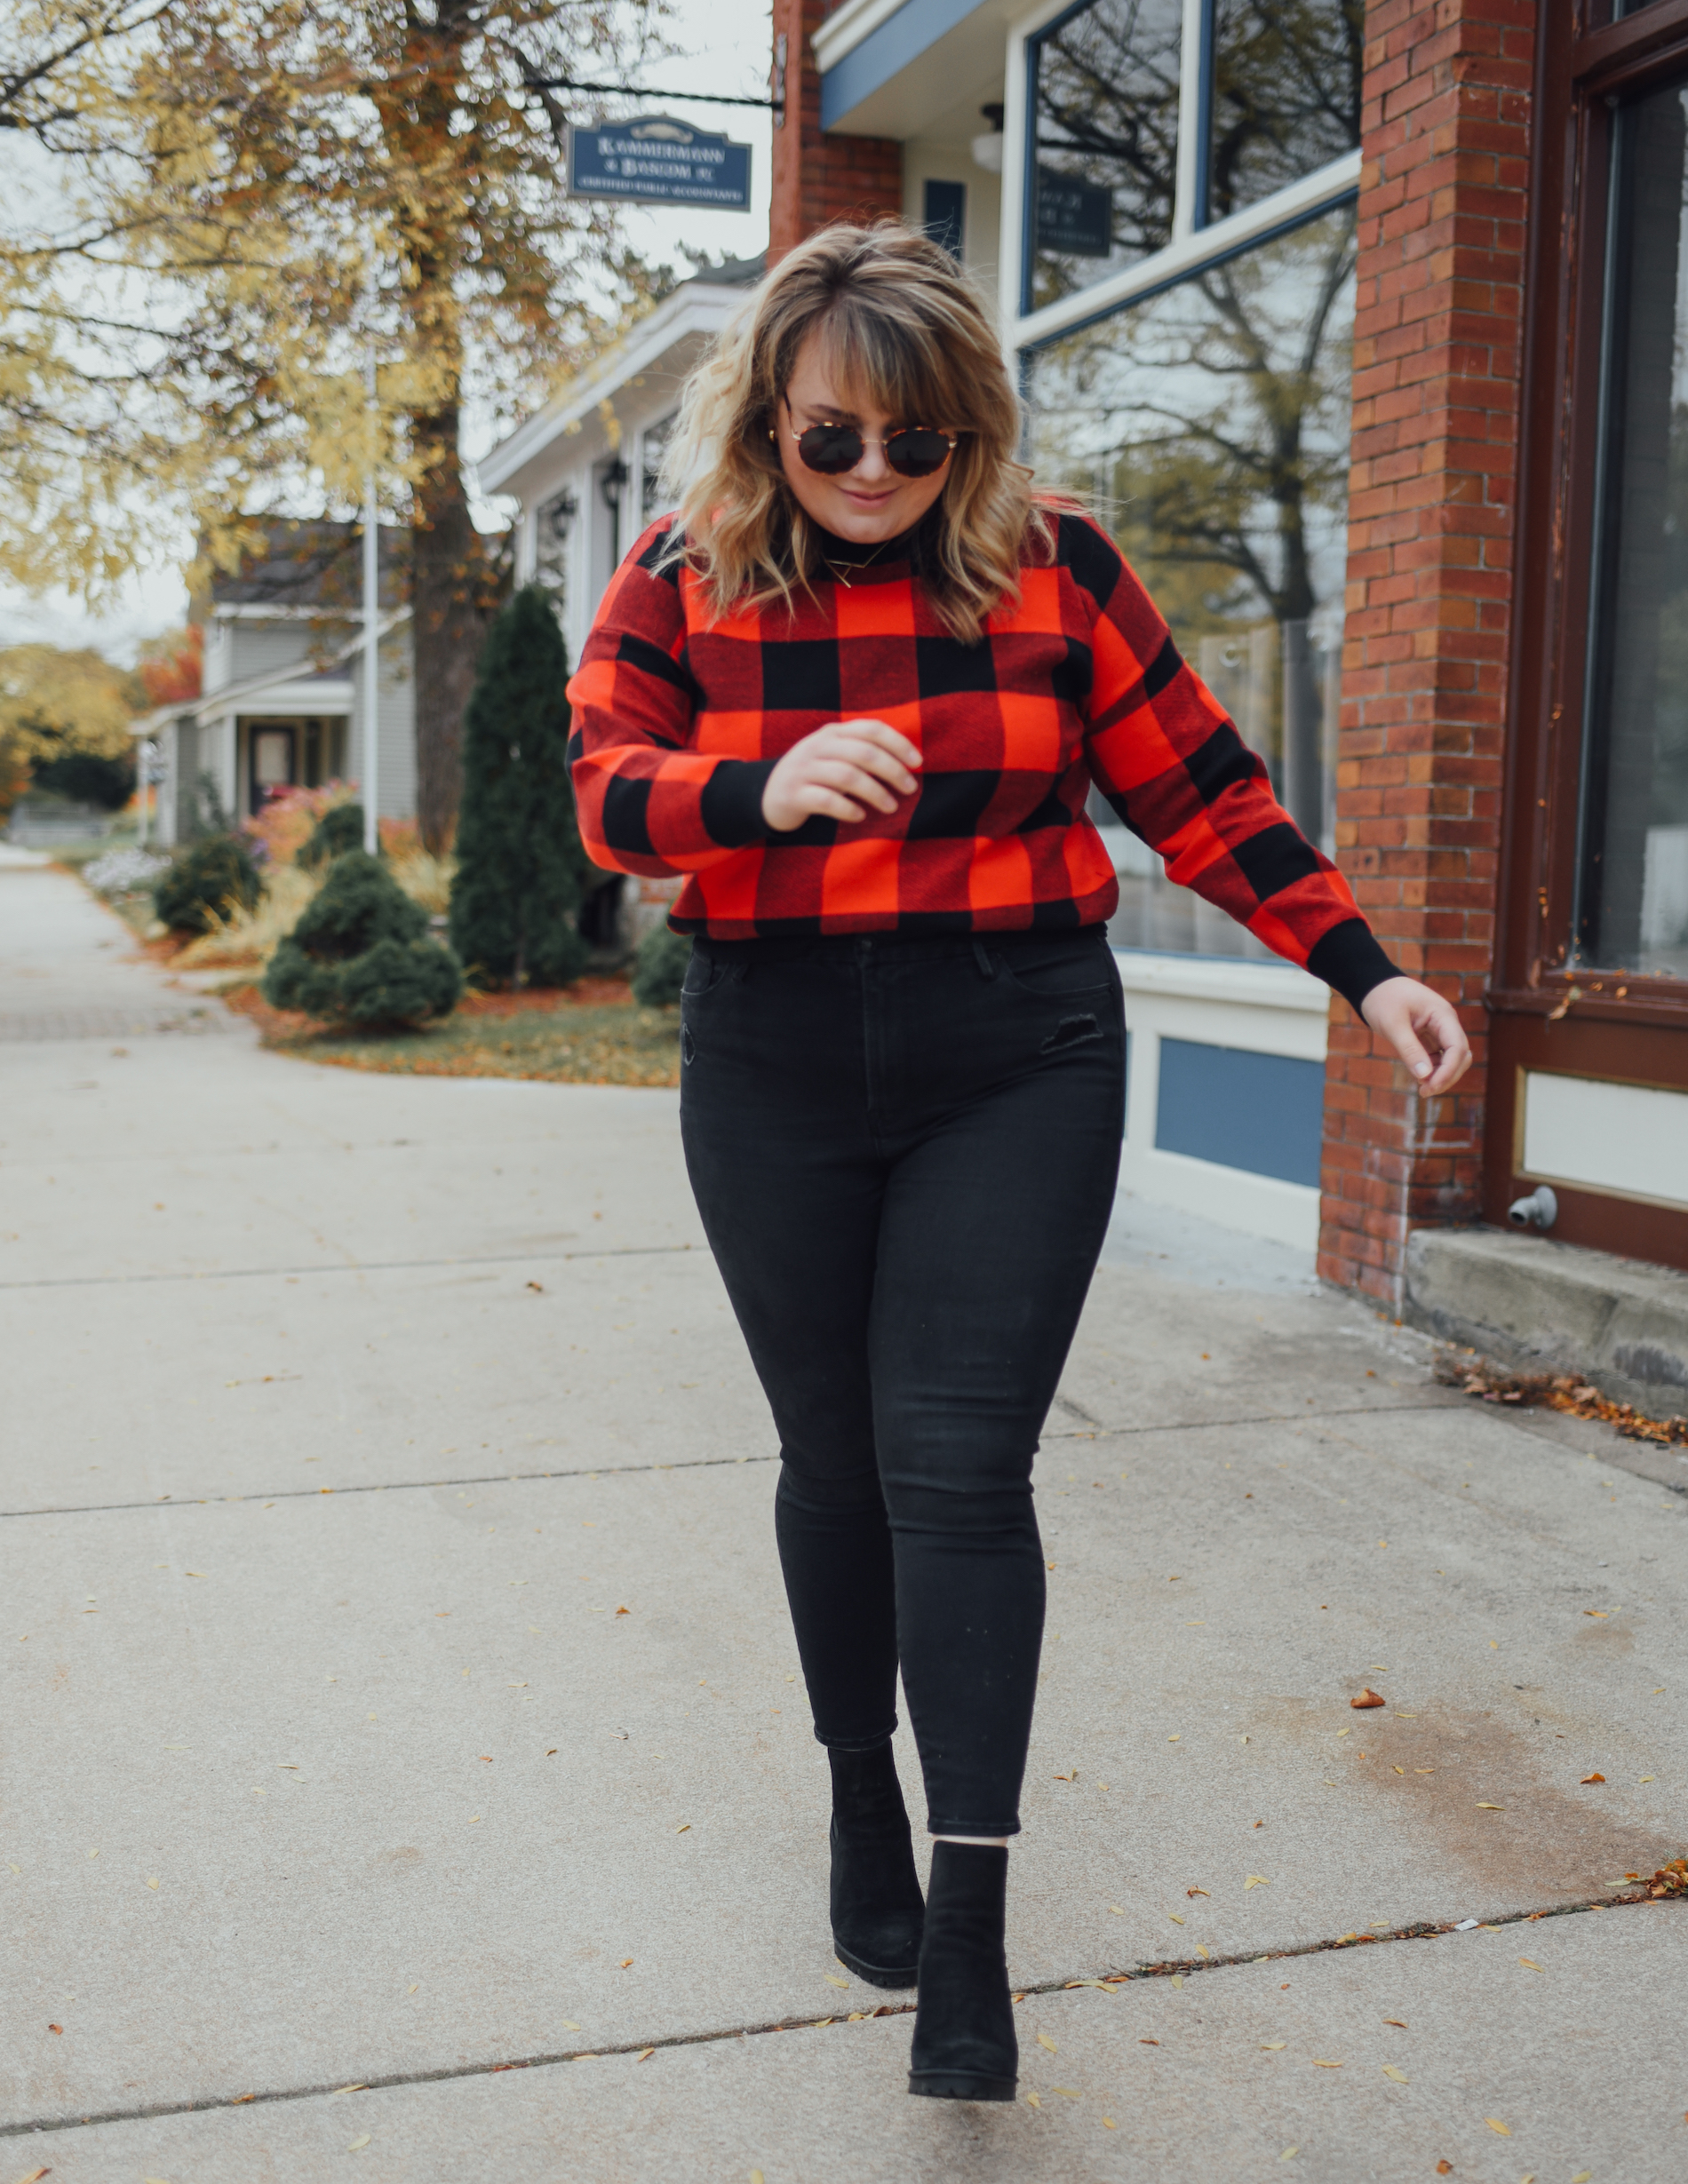 Chic Soul October. Sharing how I styled two buffalo check pattern pieces from Chic Soul this October, perfect for the holidays! 